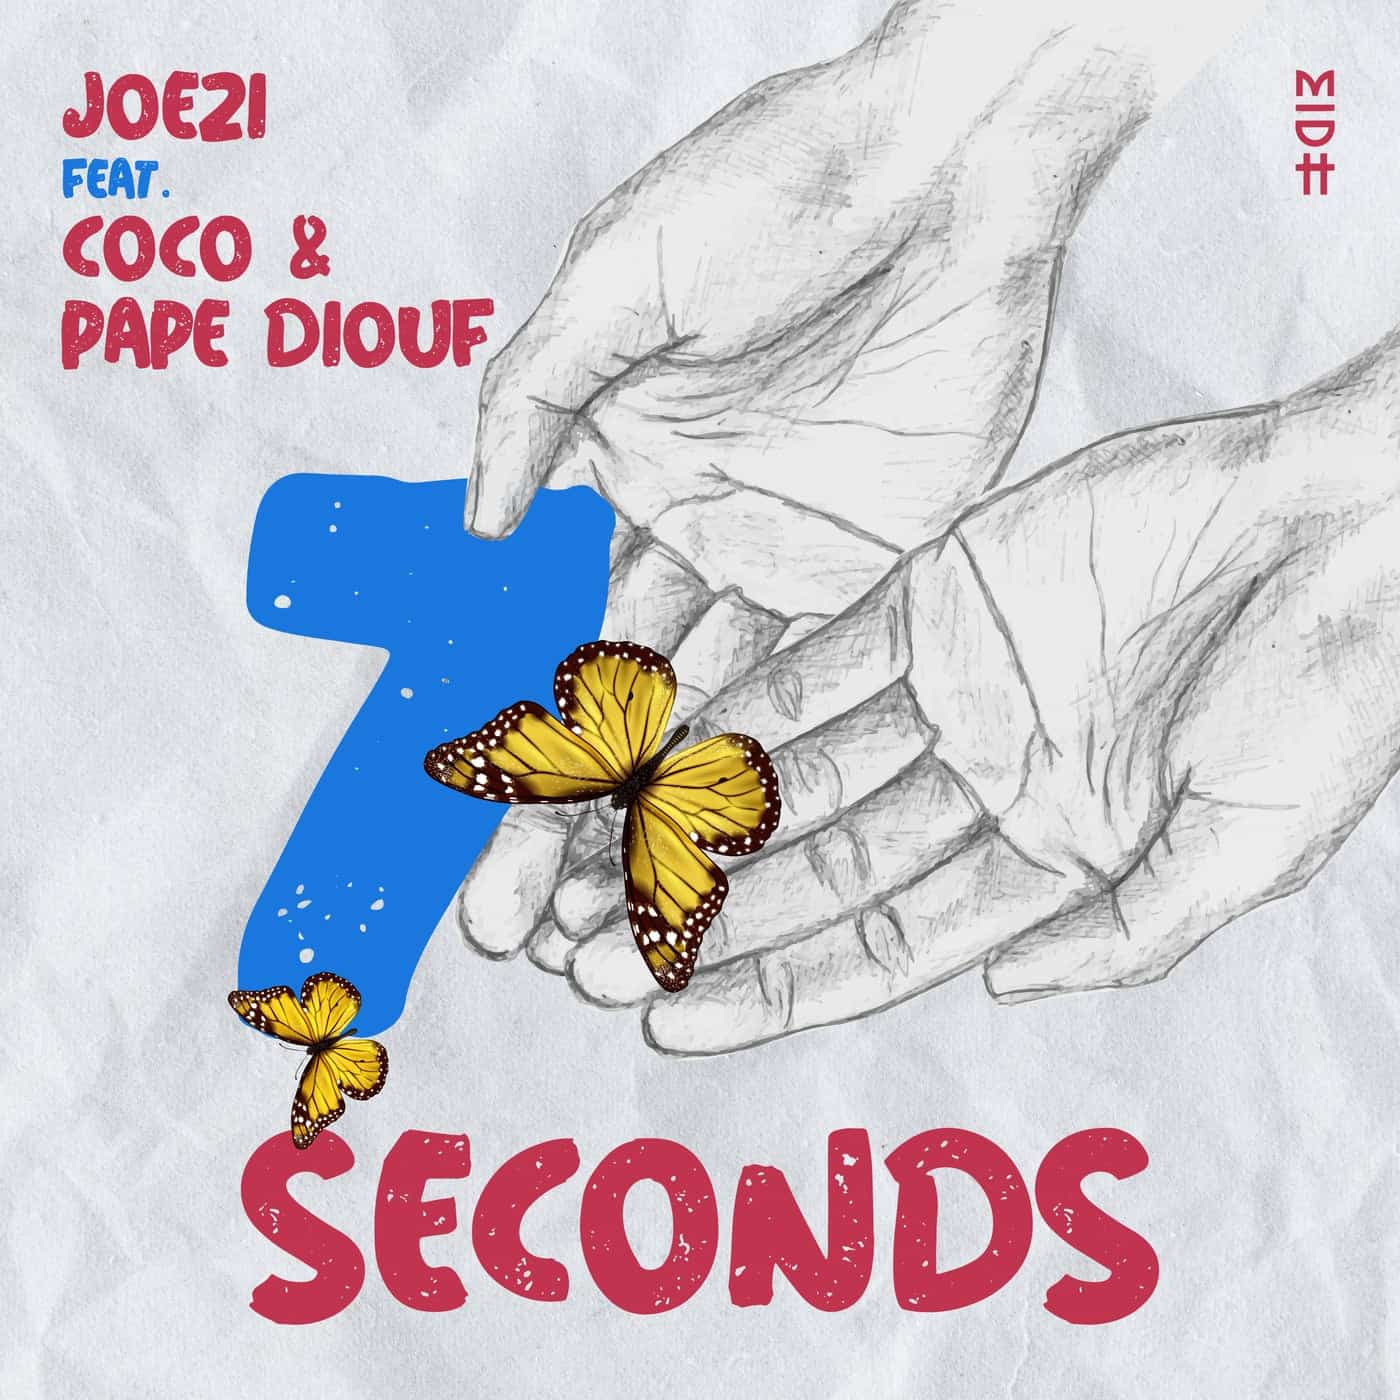 image cover: Coco, Joezi, Pape Diouf - 7 Seconds / MIDH050